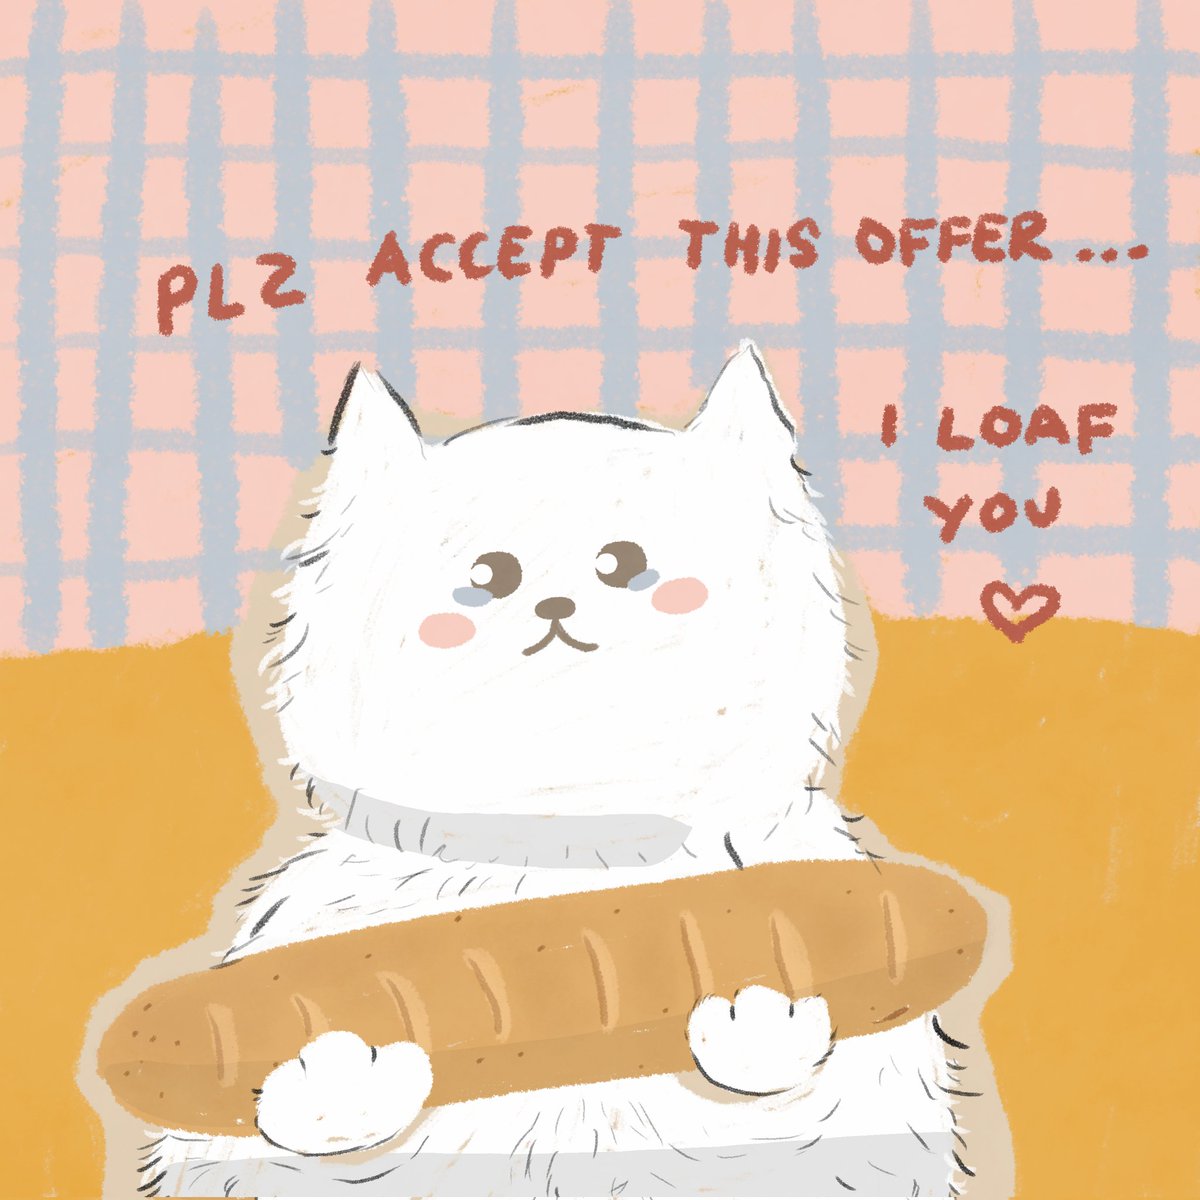 I loaf you

☀️
☀️
☀️

Tags:
#artist #artph #illustration #plannerstickers #stickersph #stickers #journalstickers #bulletjournal #kawaiiartist #kawaiiart #kawaiidrawing #journalinspiration #artgram #illustrationart #pastelaesthetic #aestheticart #cuteaesthetic #artistchallenge